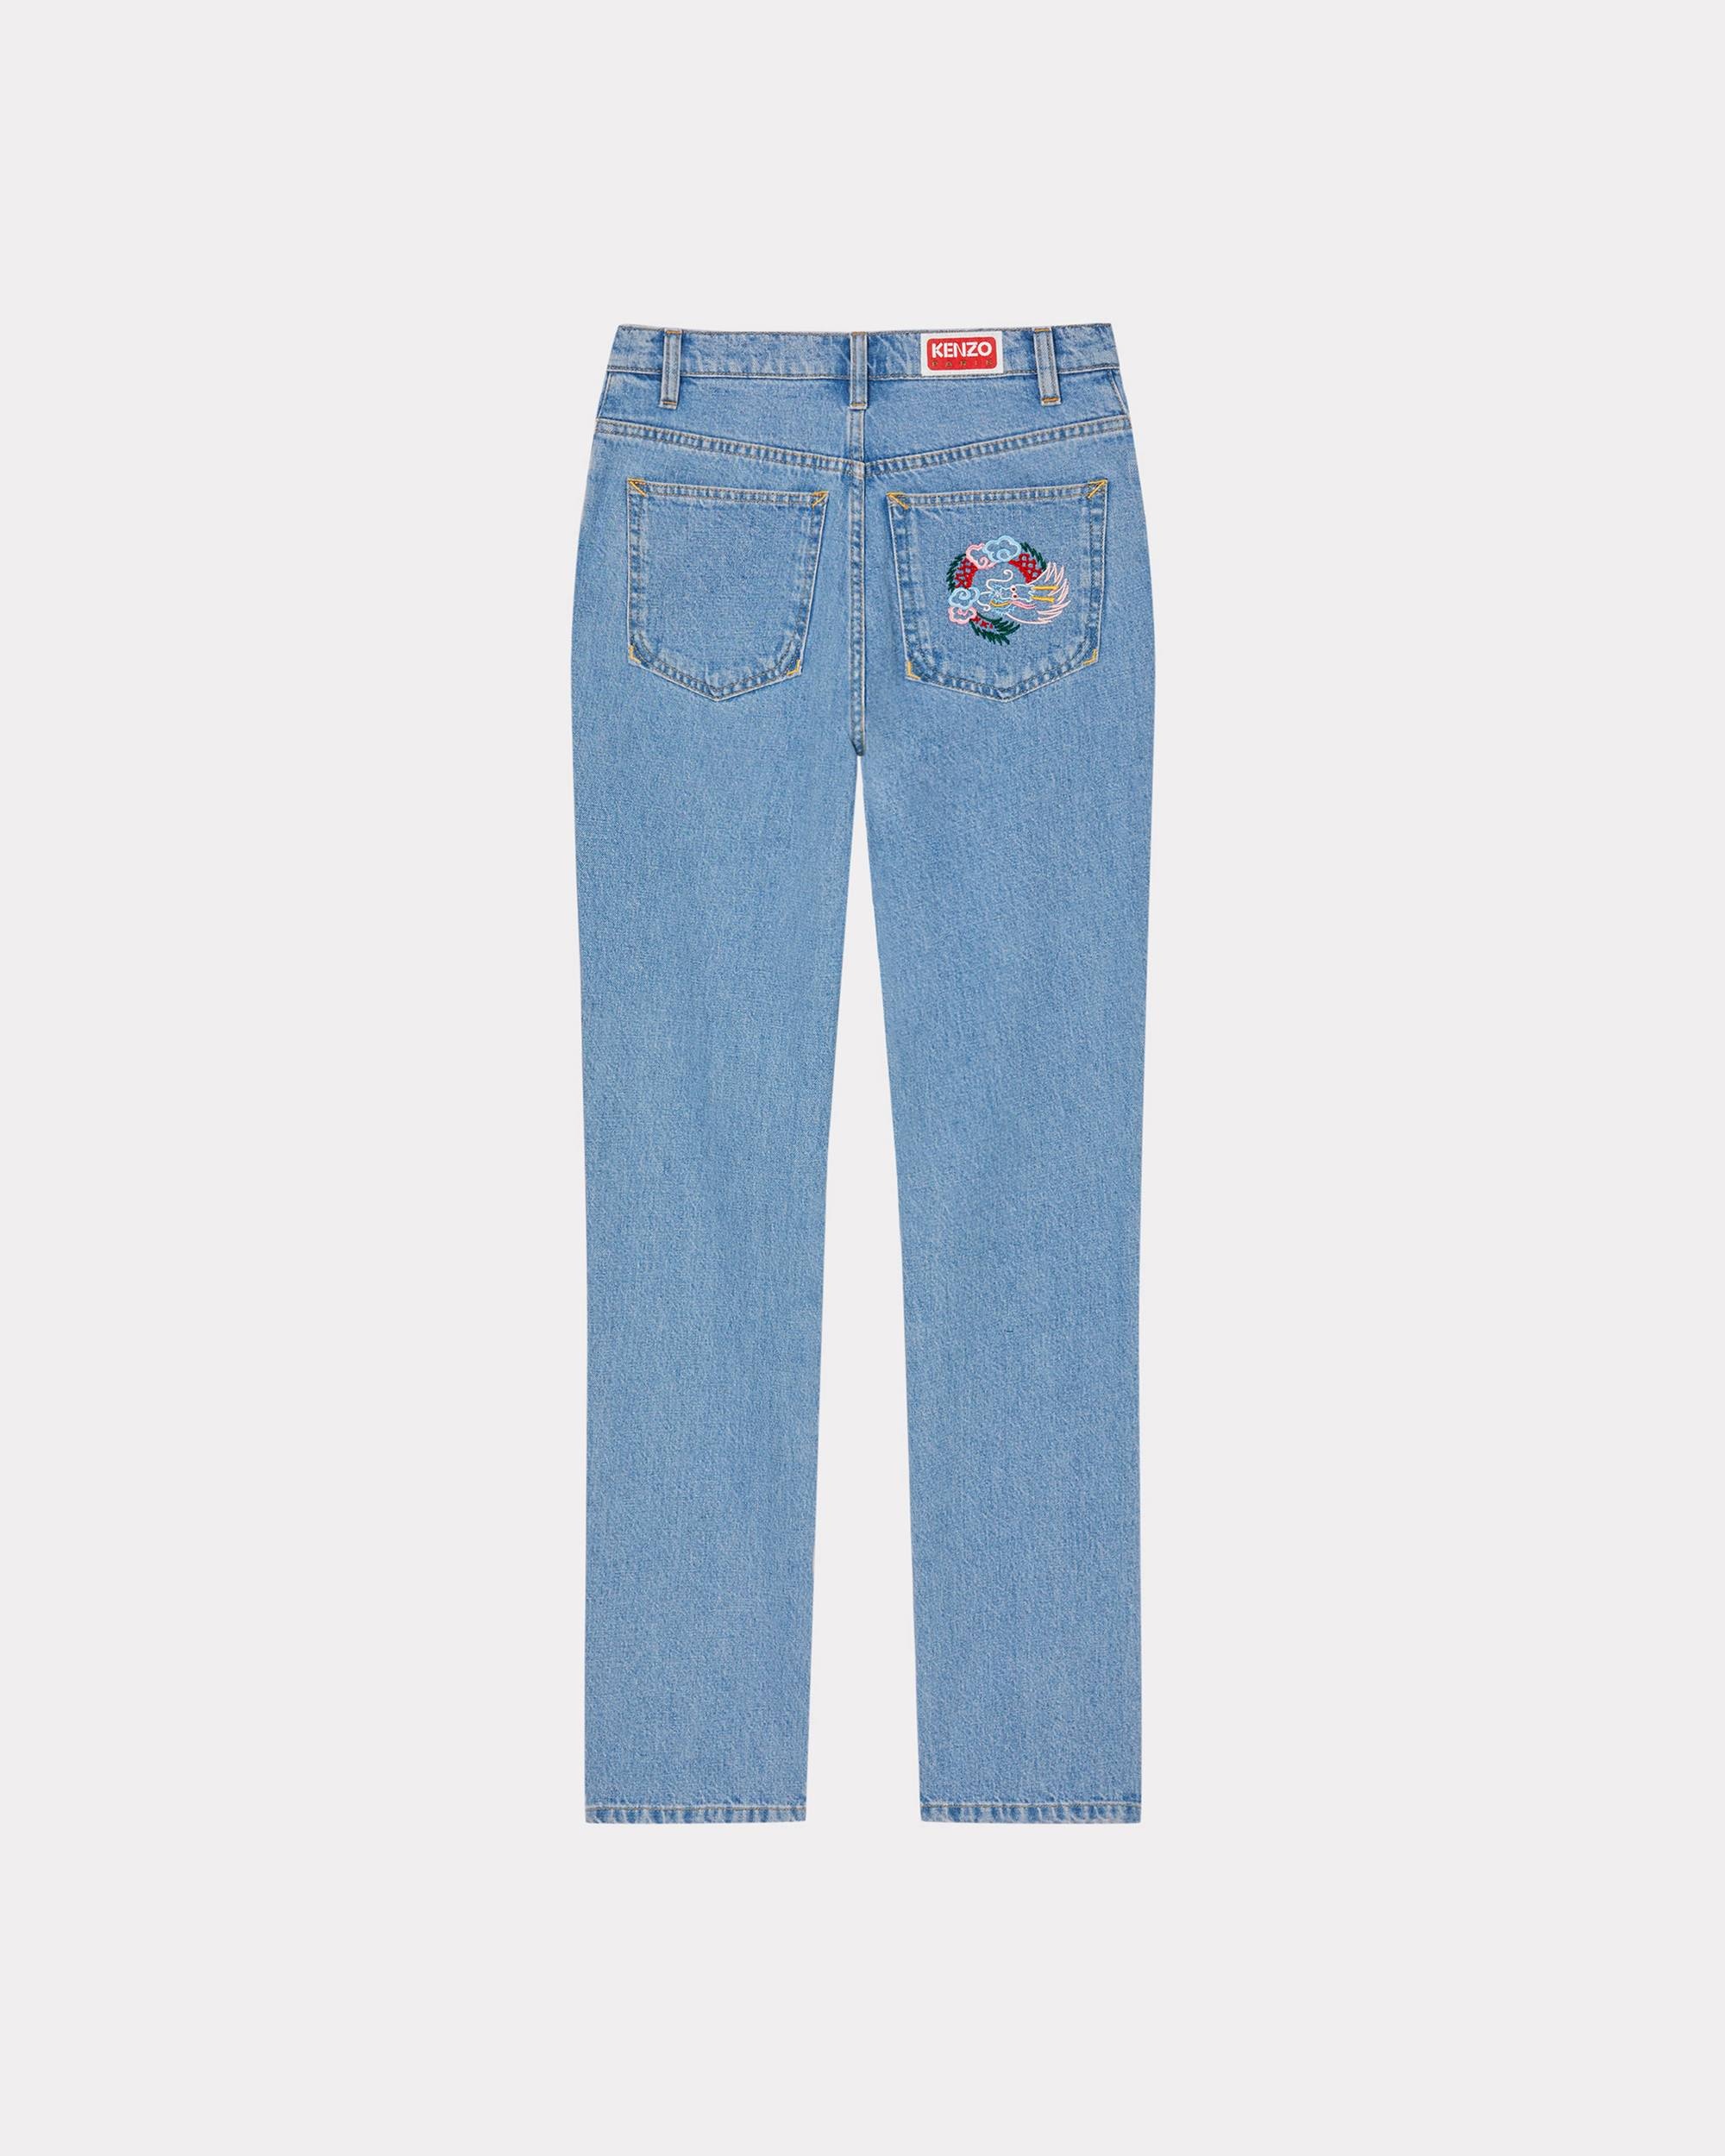 'Year of the Dragon' cropped embroidered ASAGAO jeans - 2